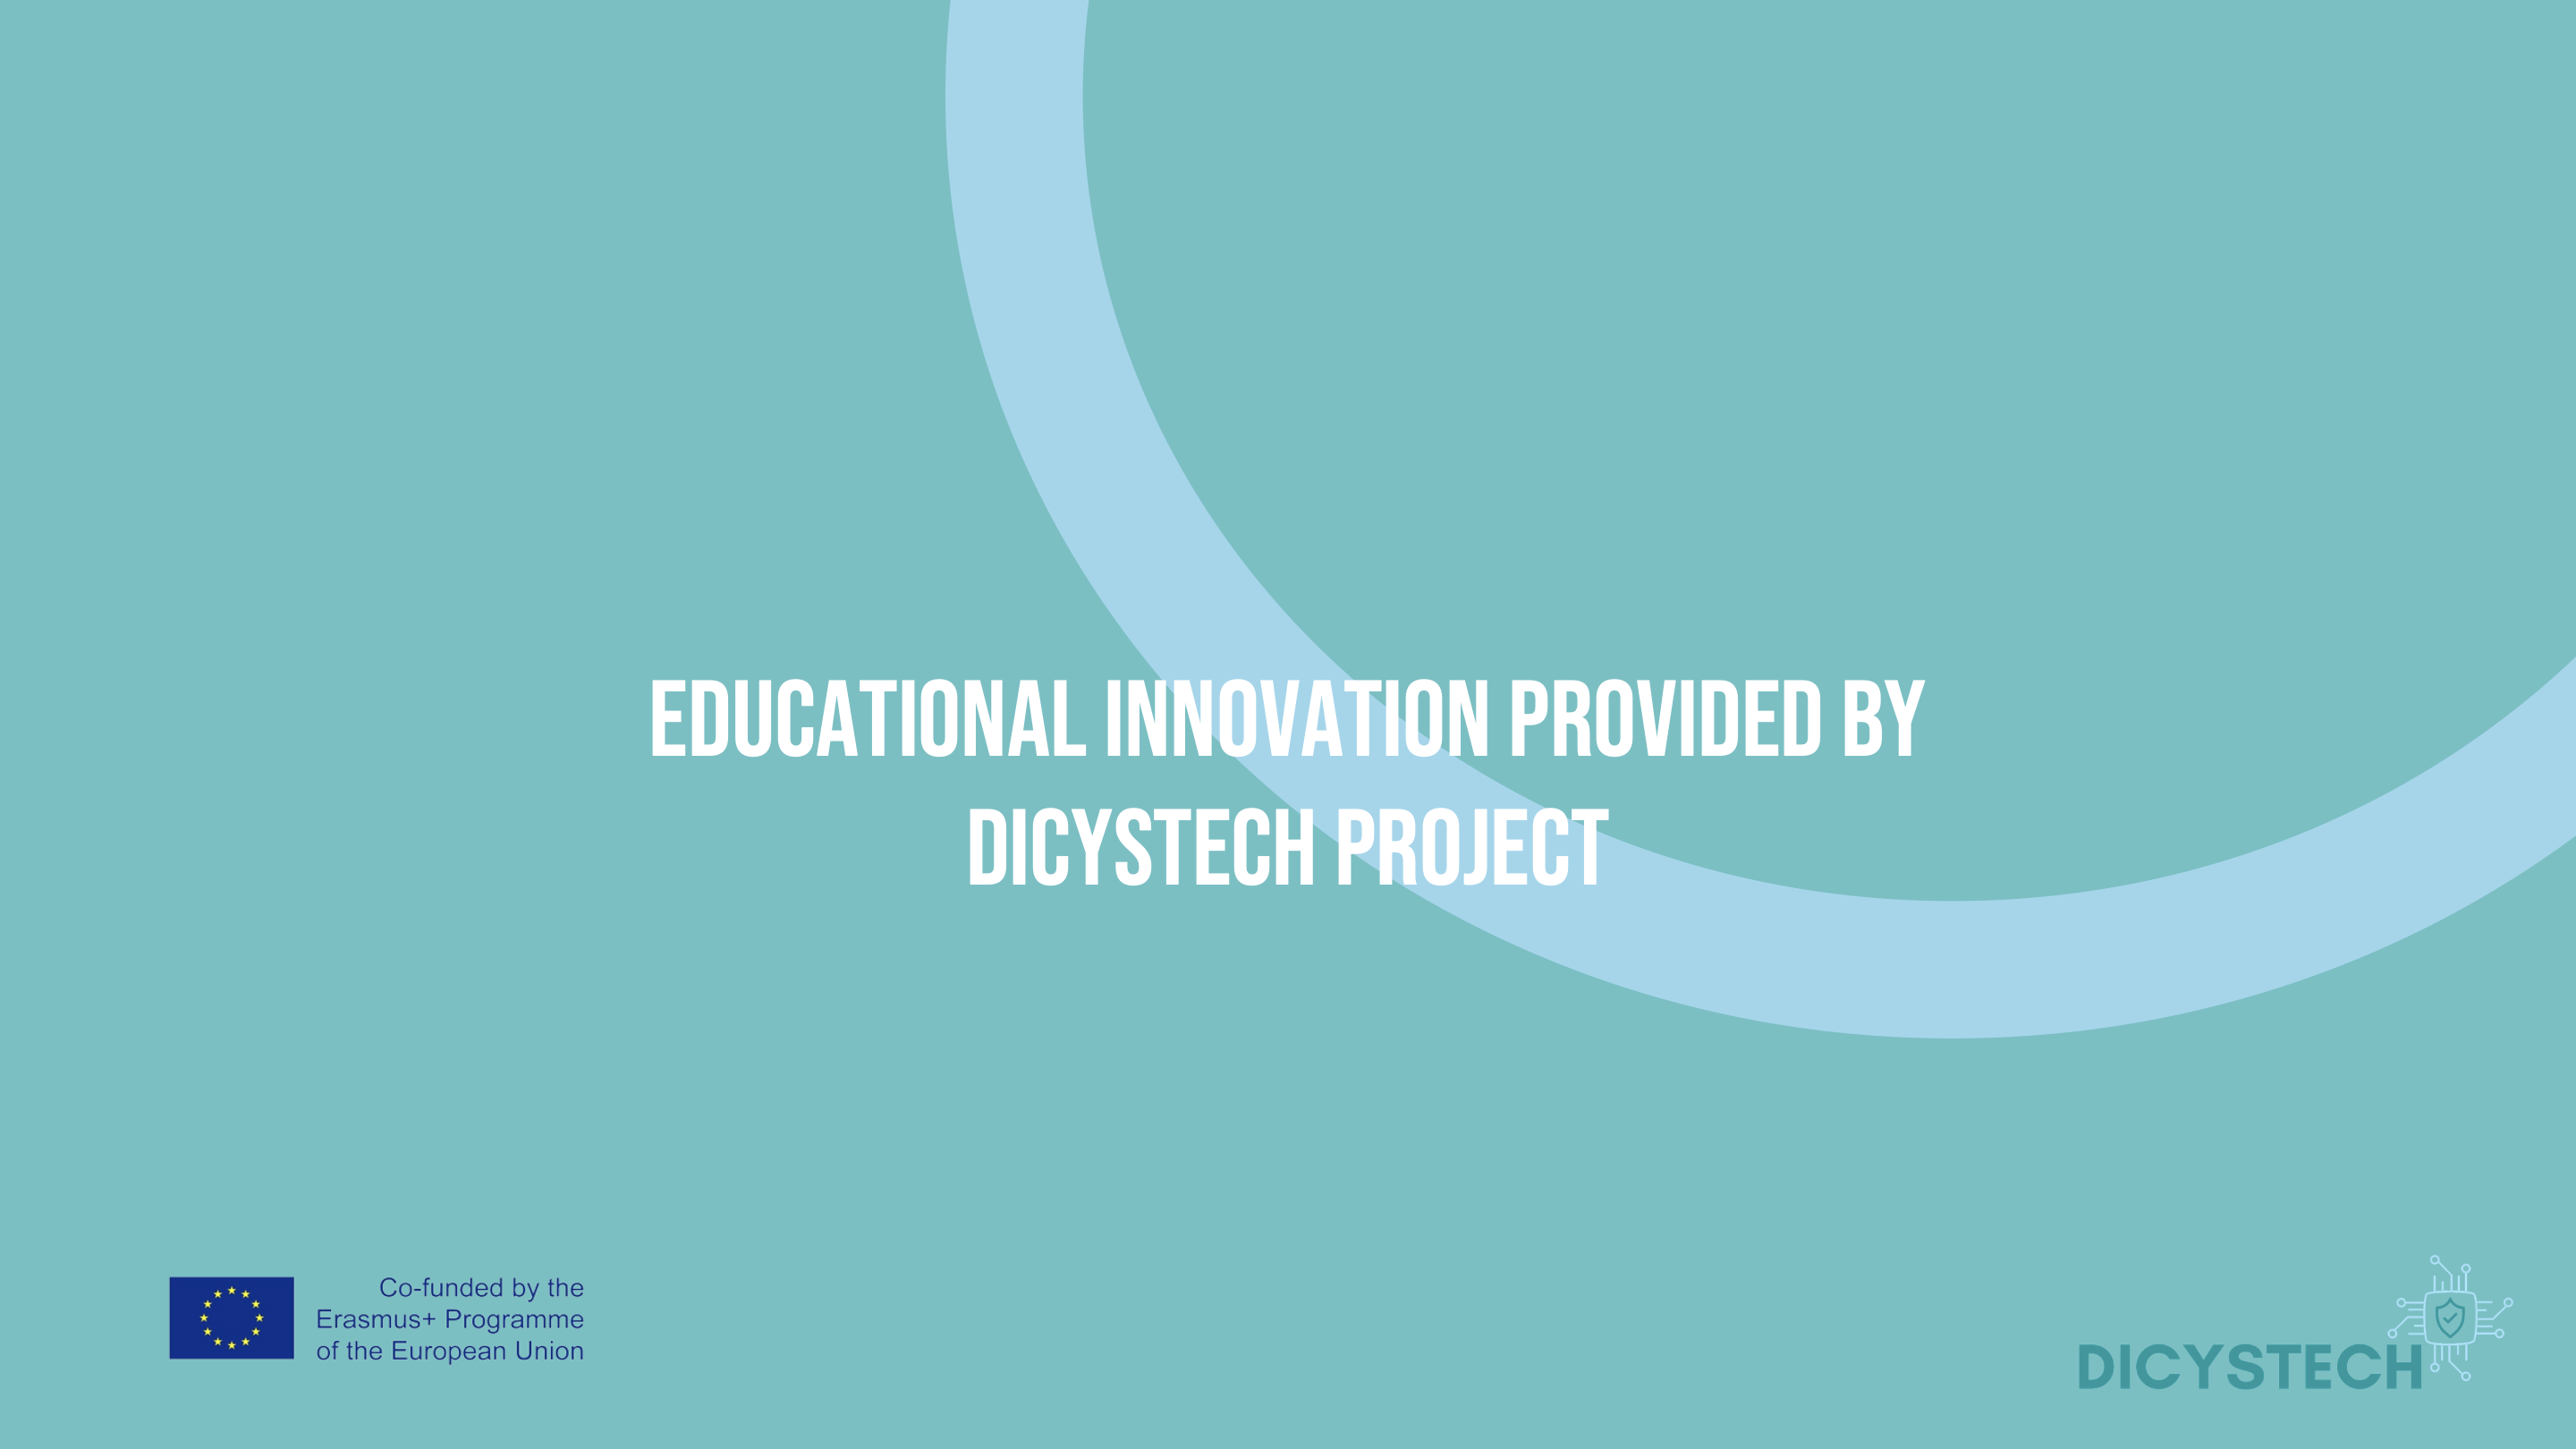 EDUCATIONAL INNOVATION PROVIDED BY DICYSTECH PROJECT